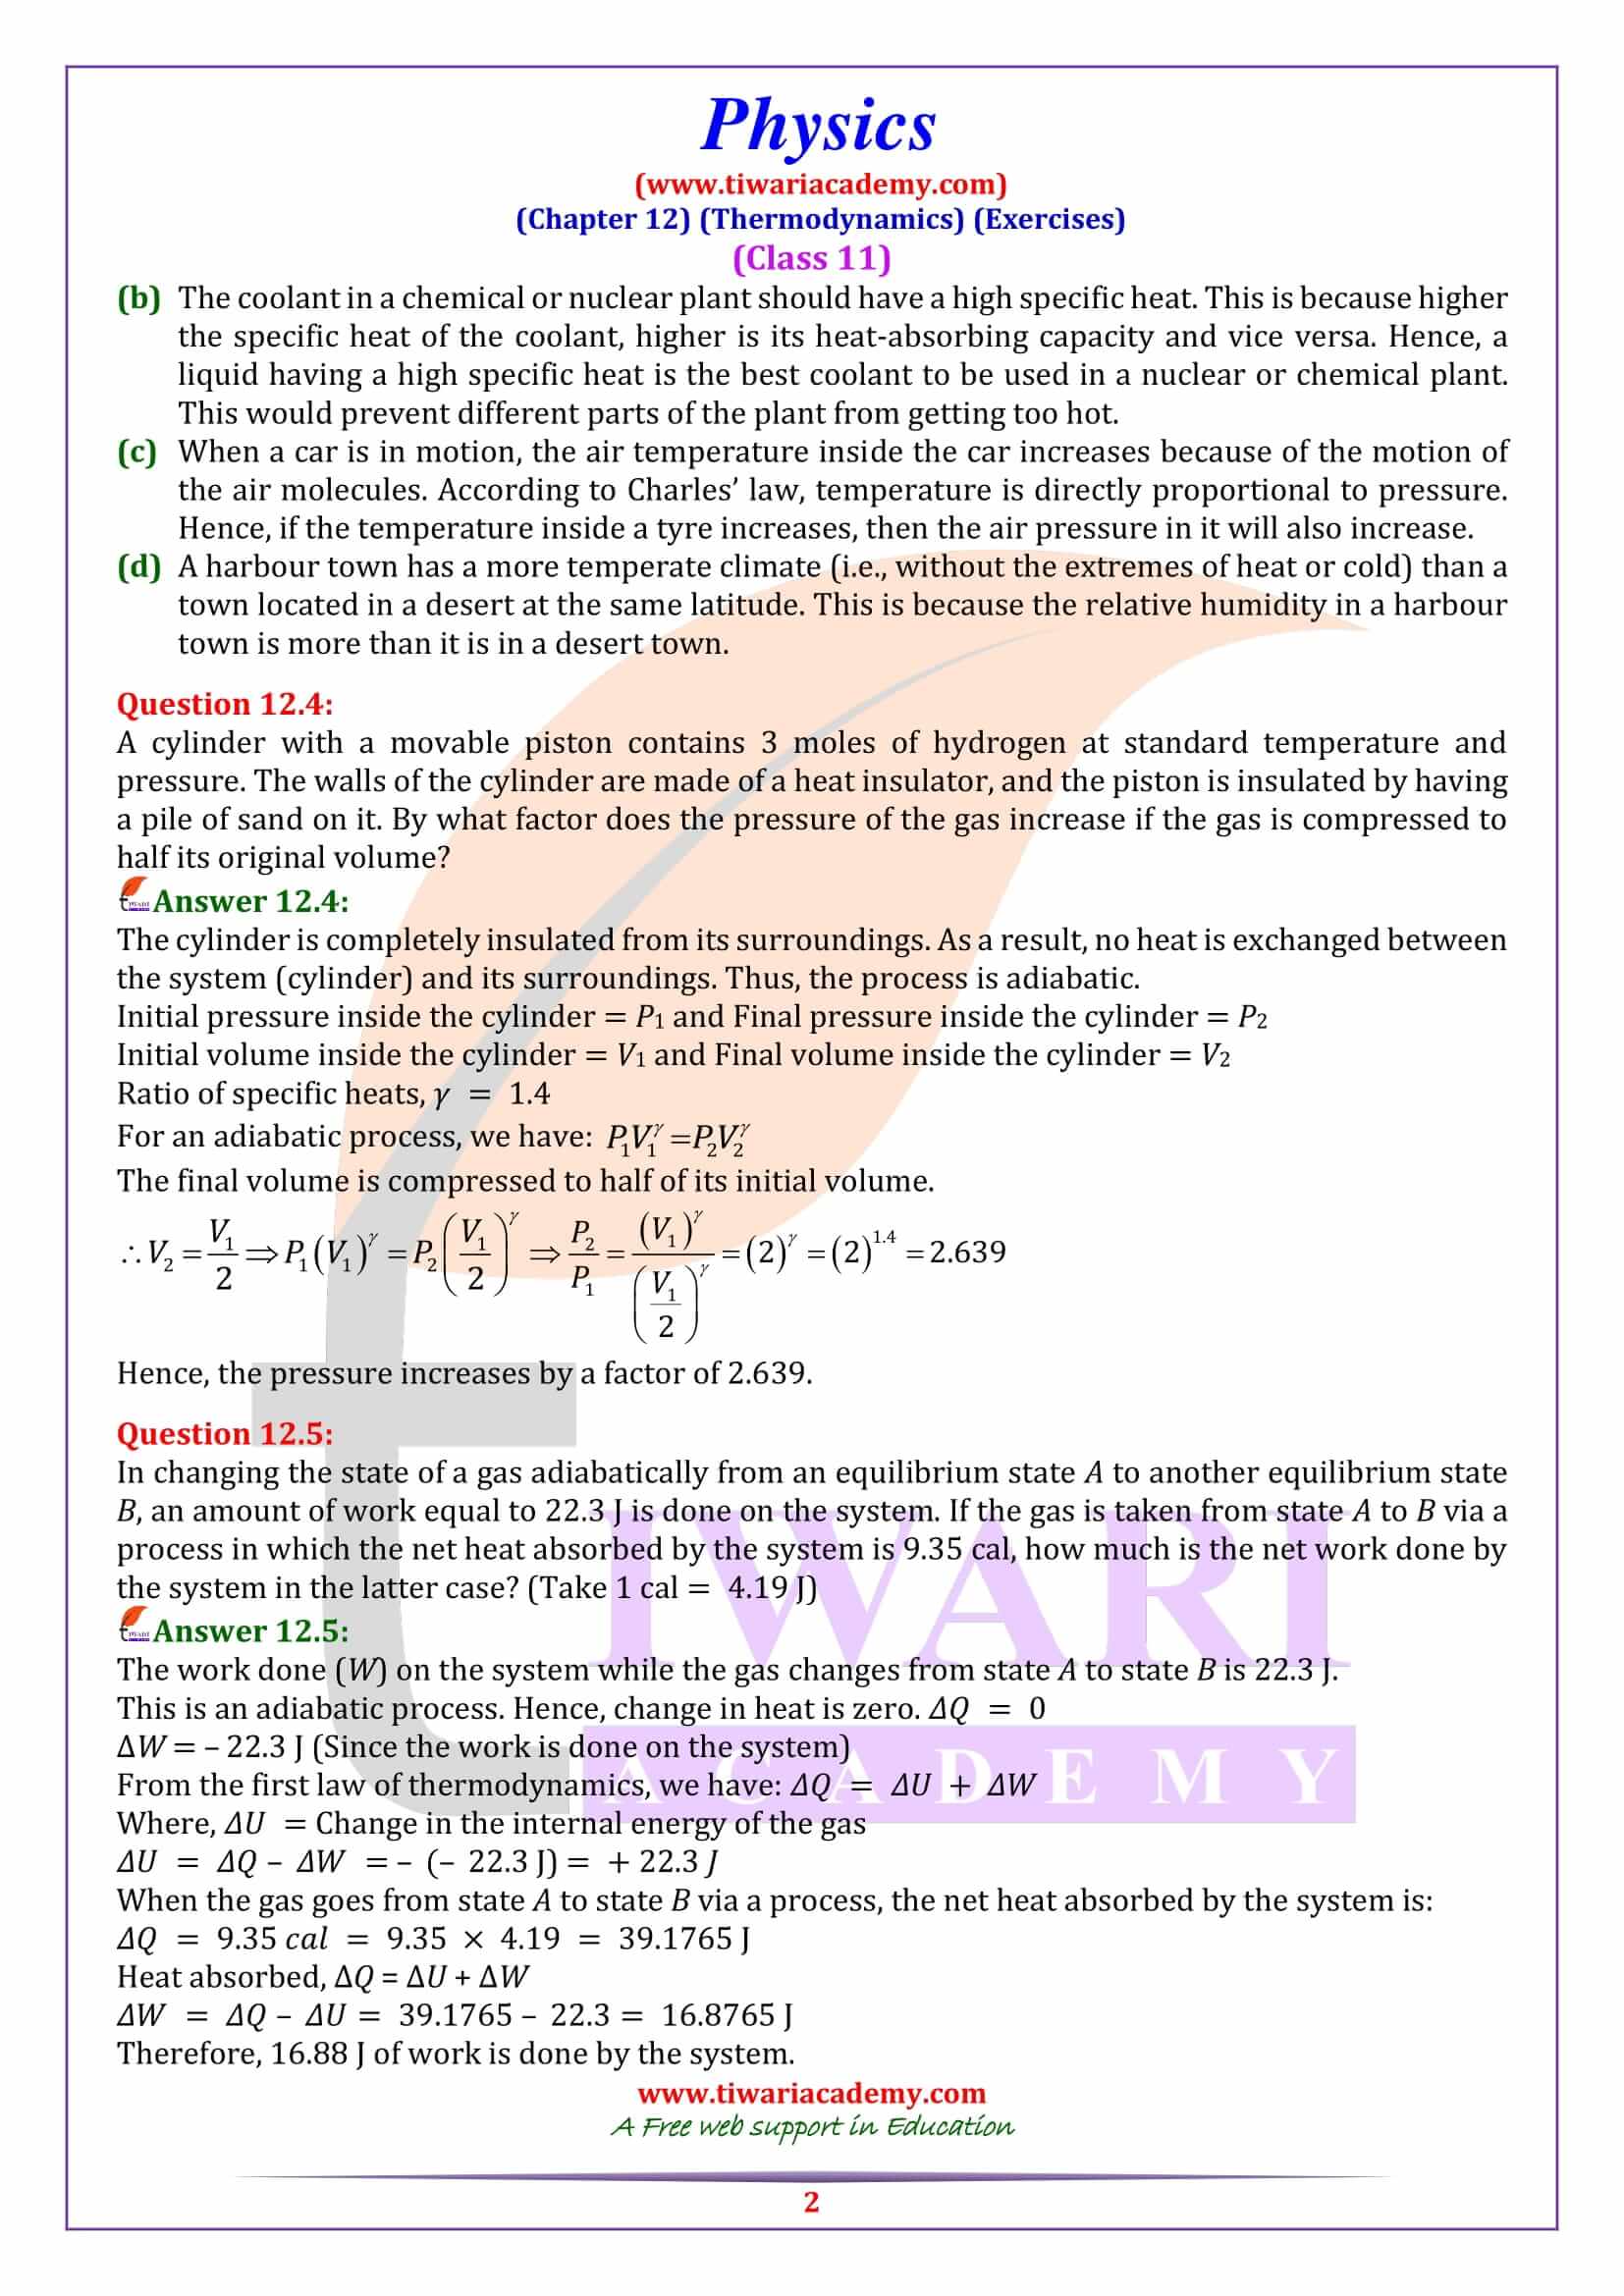 NCERT Solutions for Class 11 Physics Chapter 12